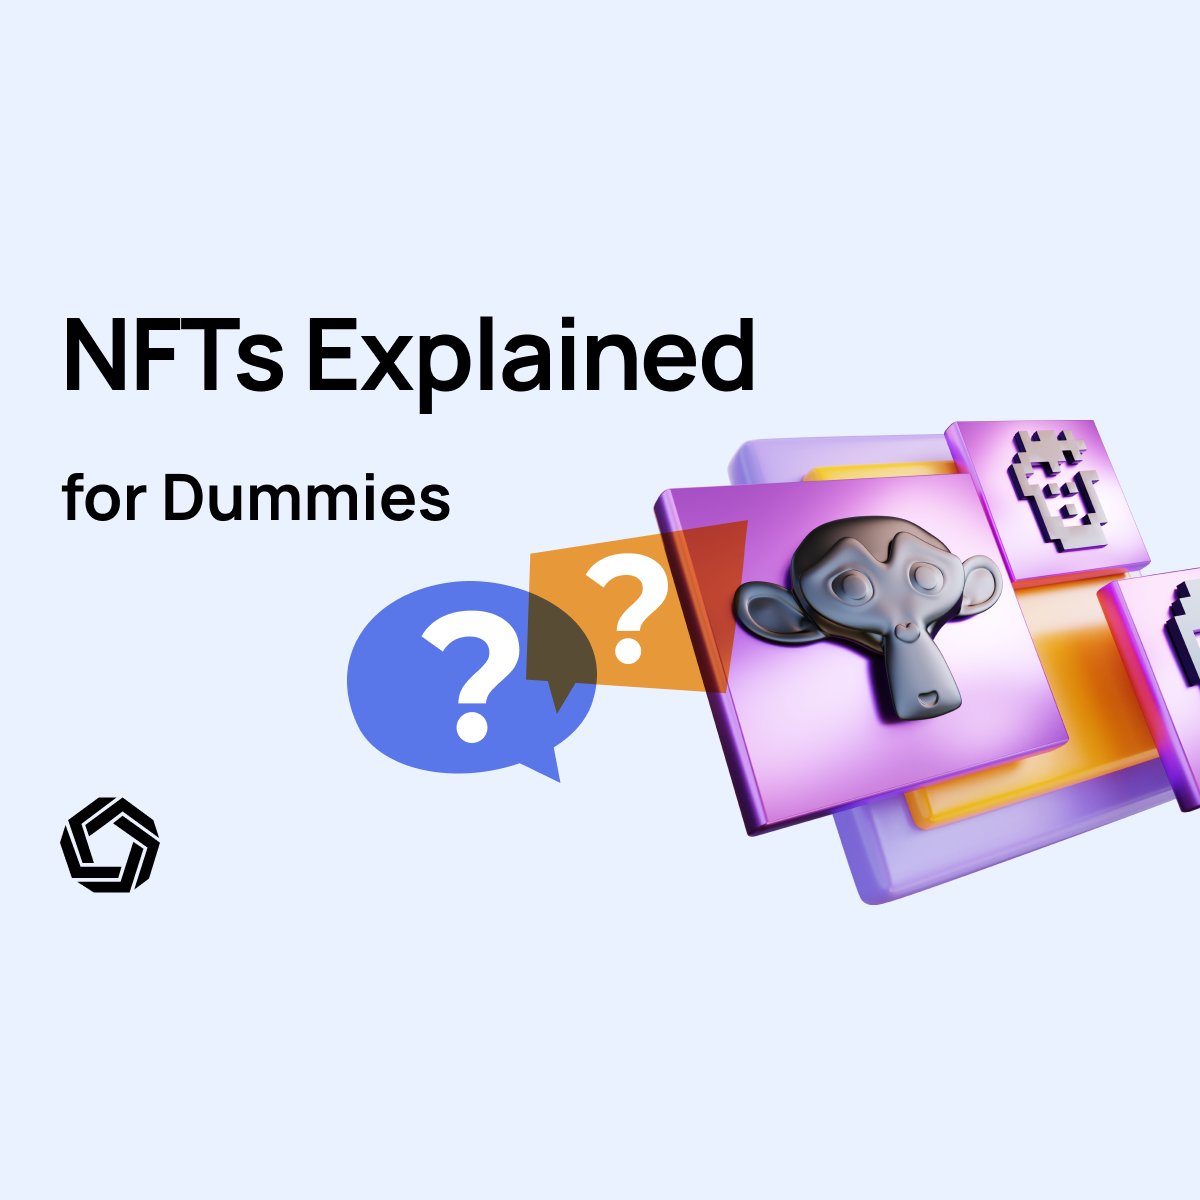 NFTs Explained for Dummies